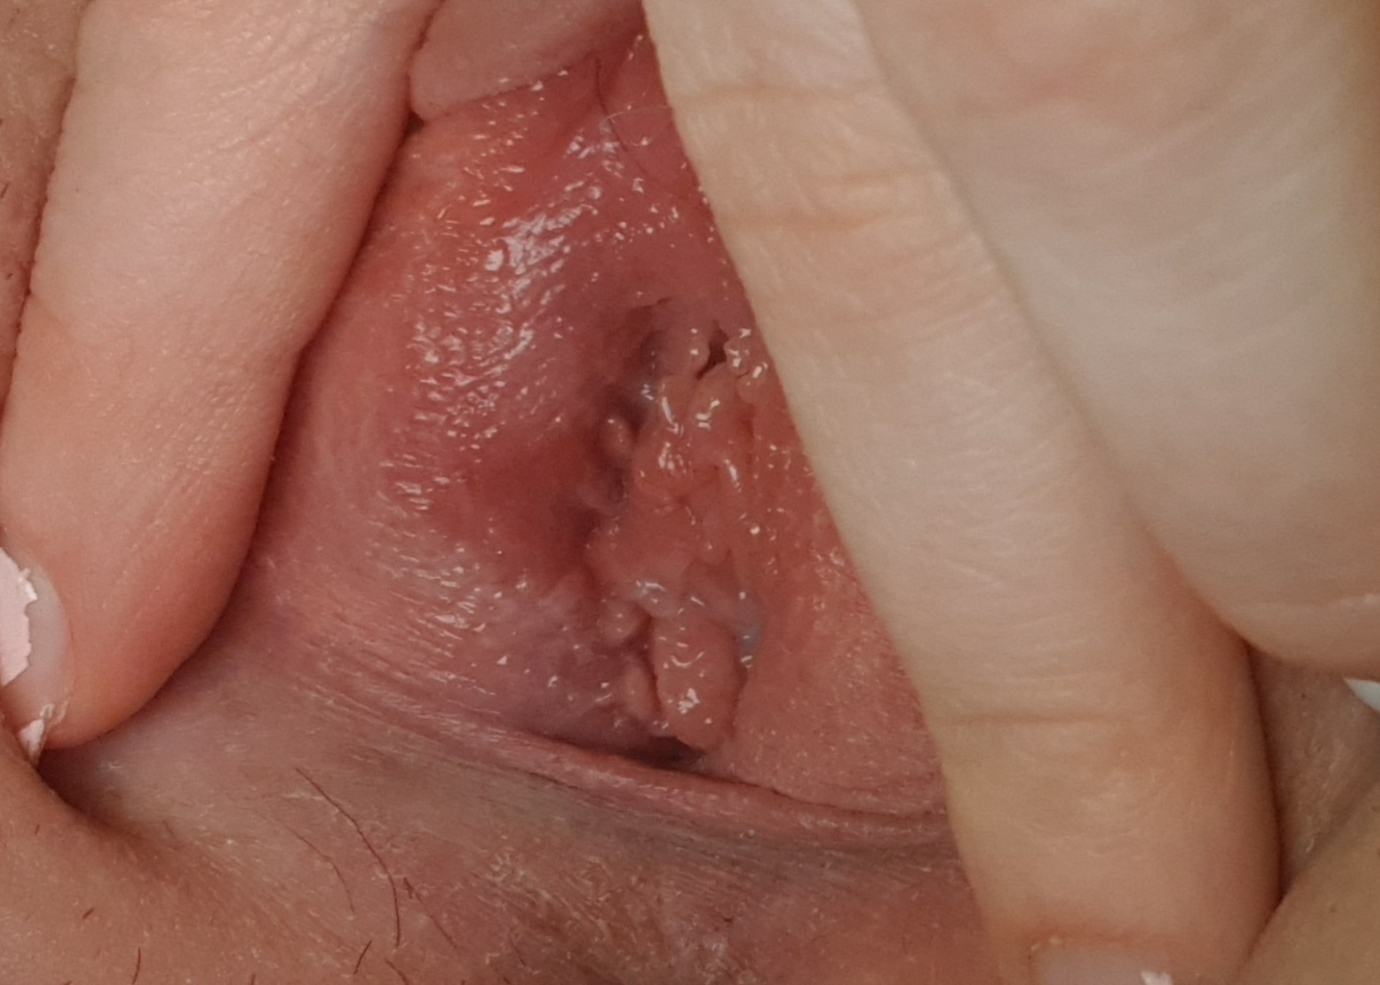 Why Does My Vagina Smell Weird